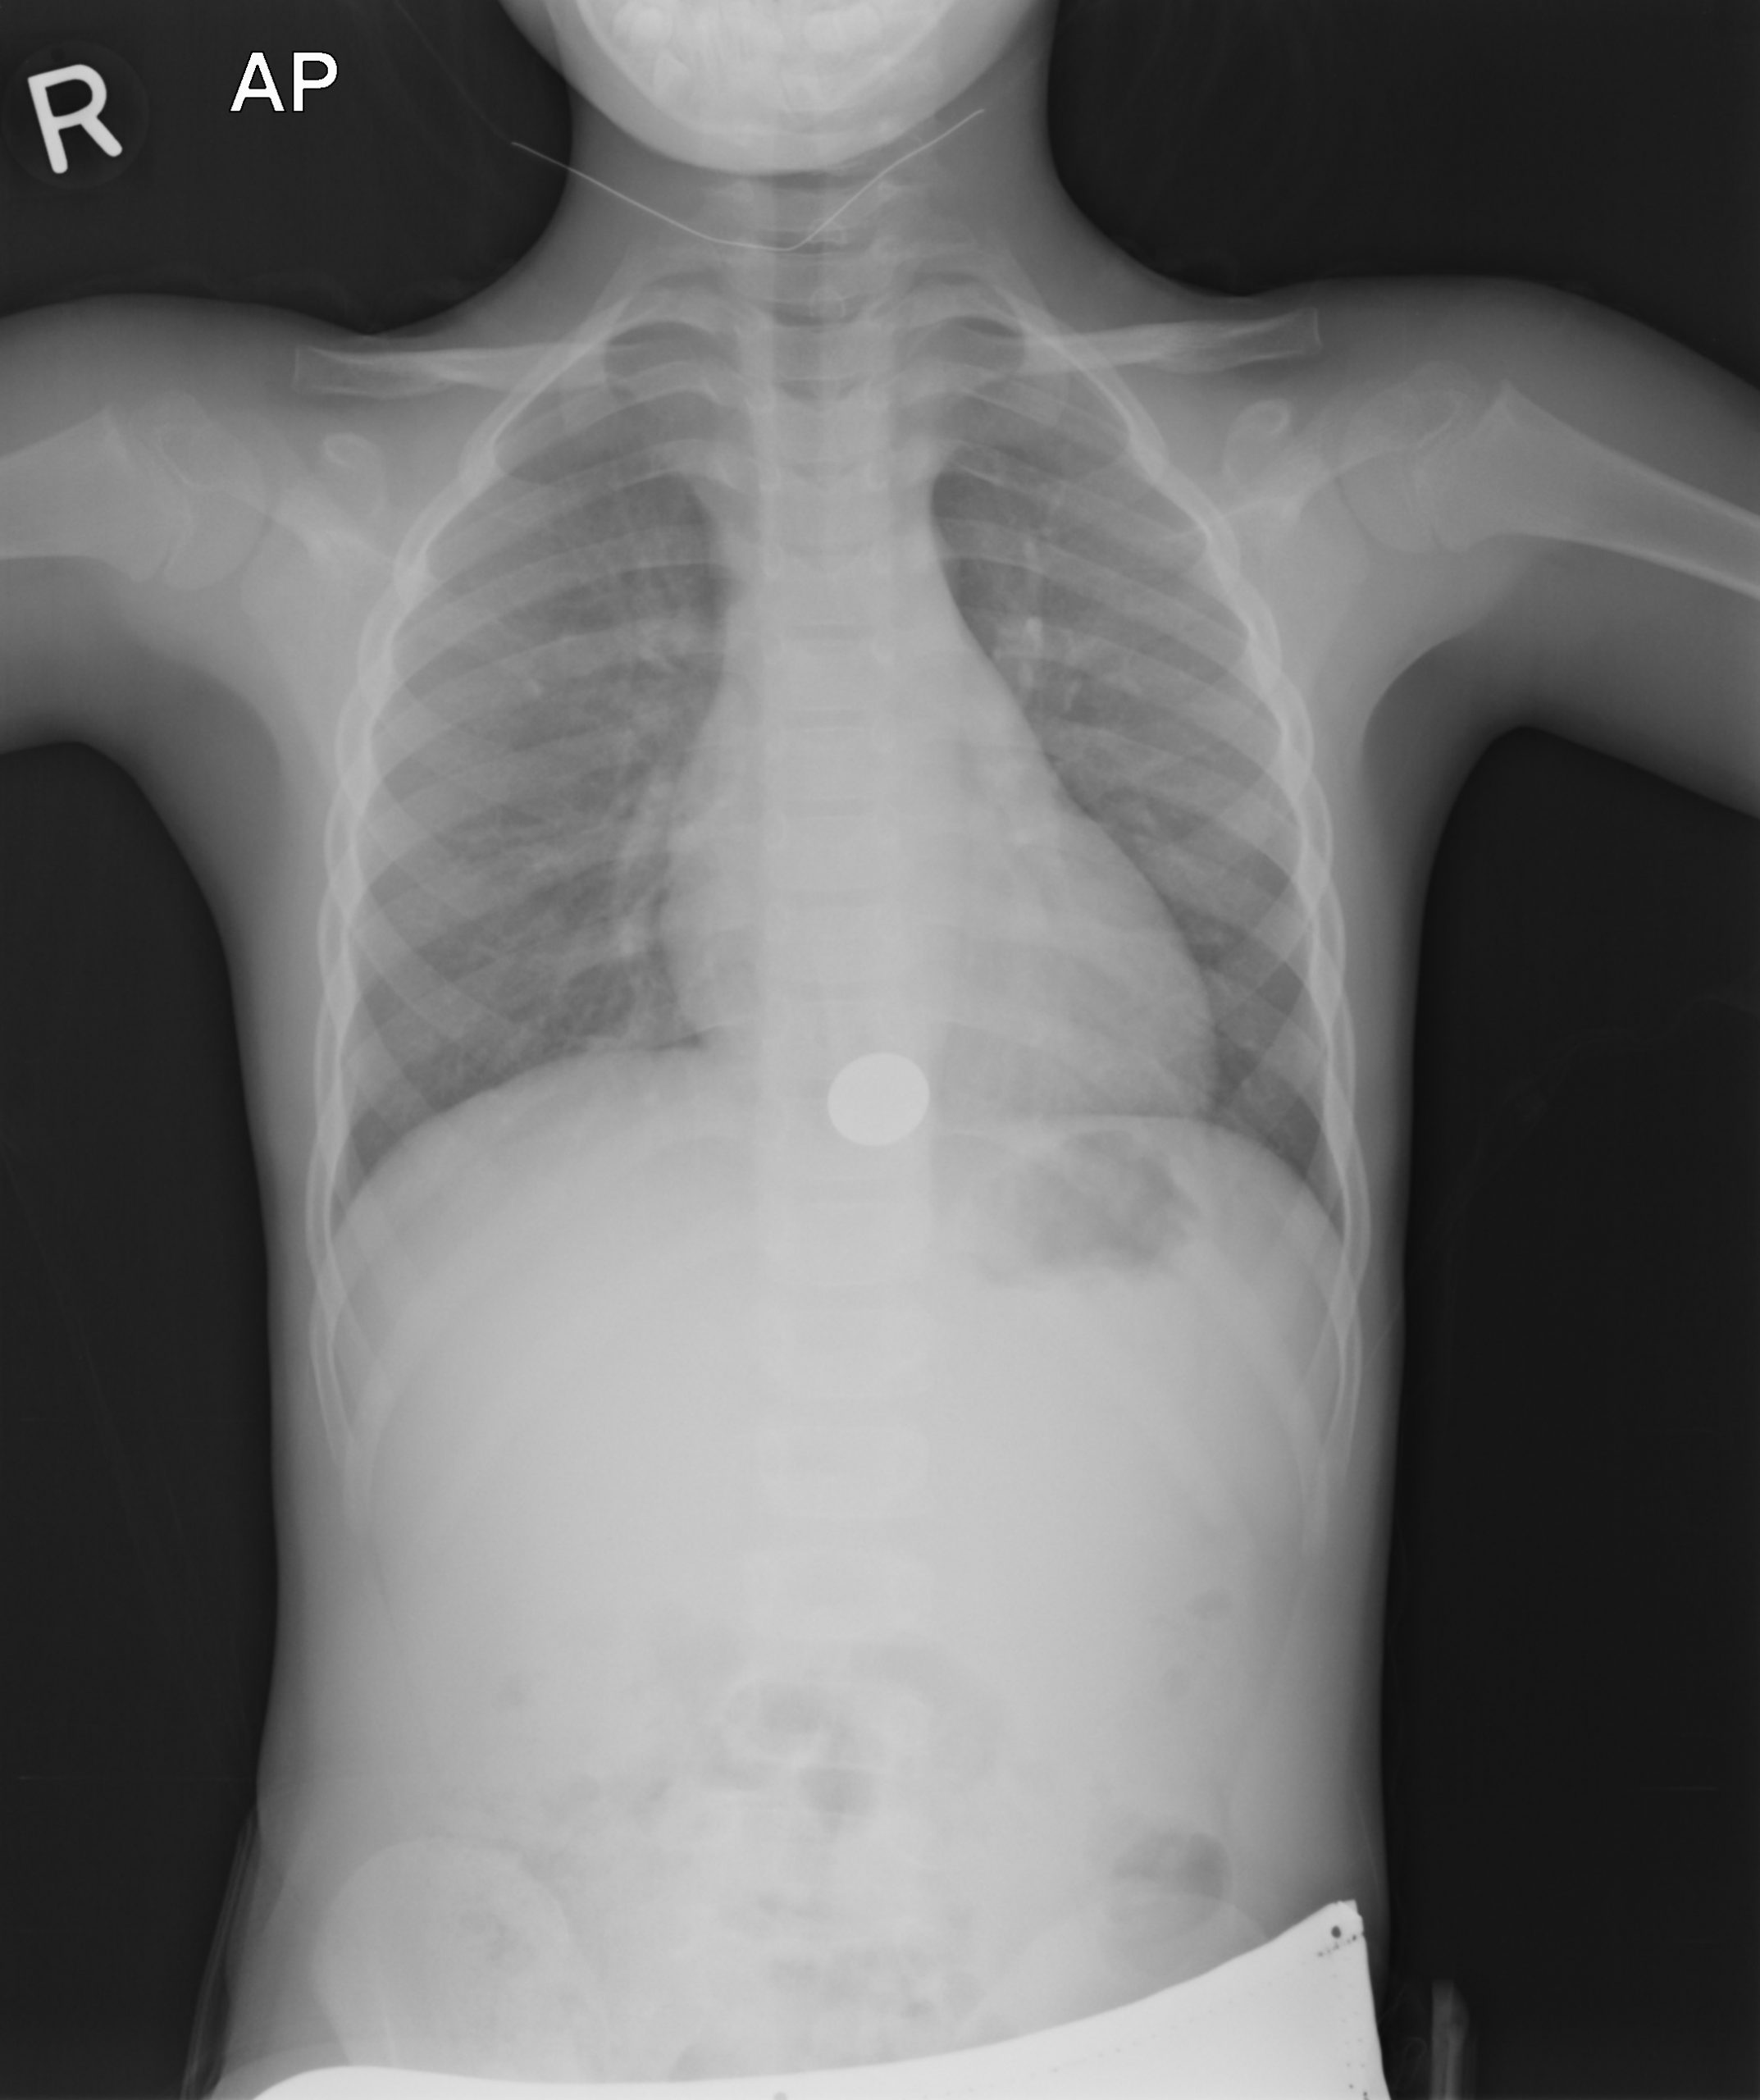 black and white x-ray image of a human torso with bones and organs visible; 